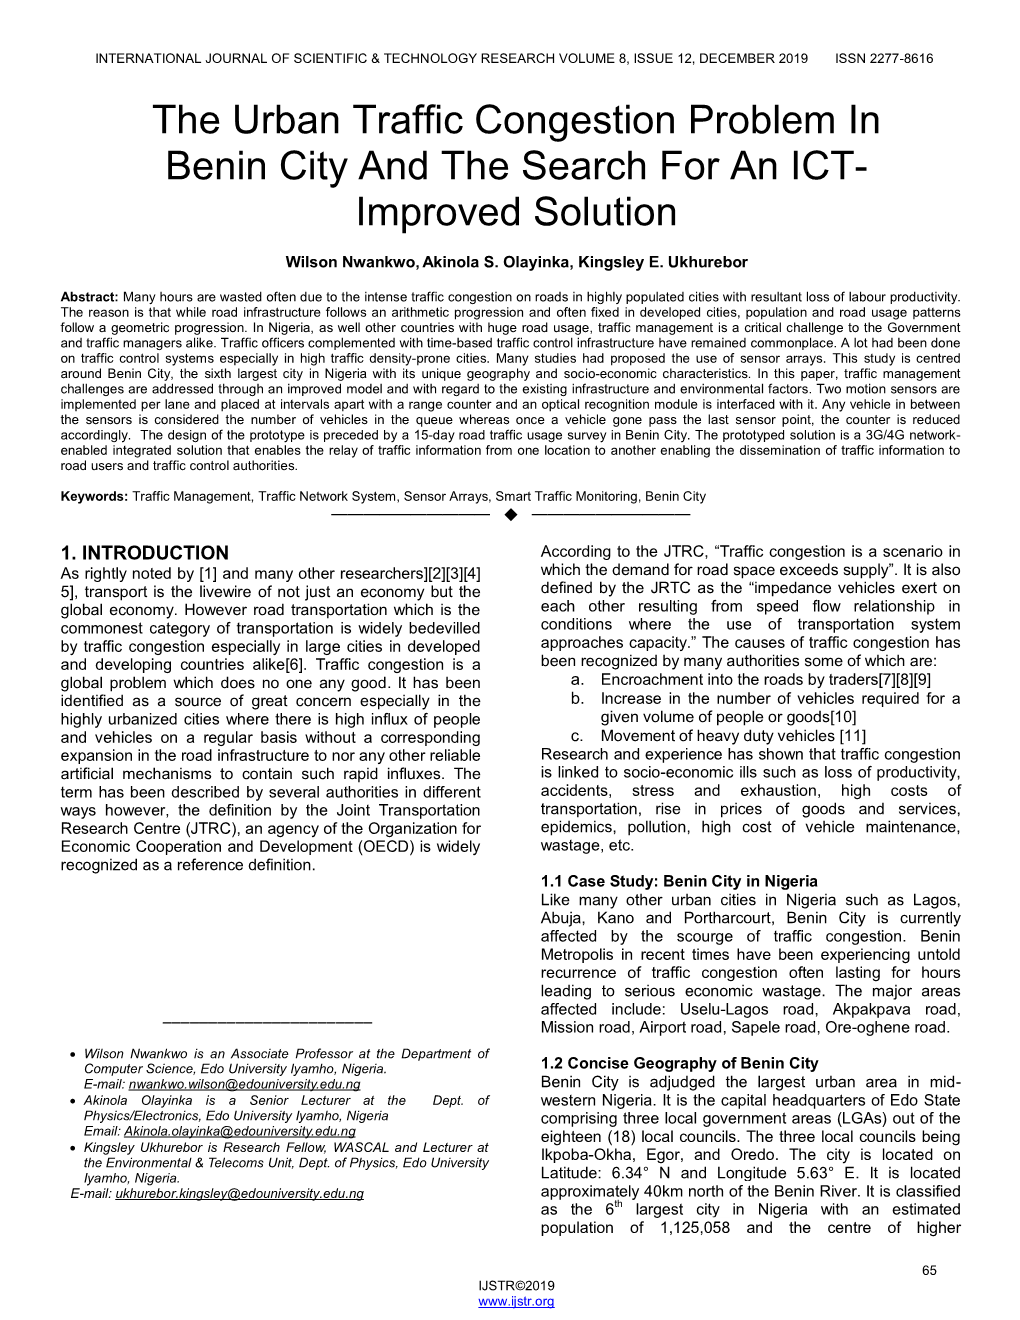 The Urban Traffic Congestion Problem in Benin City and the Search for an ICT- Improved Solution